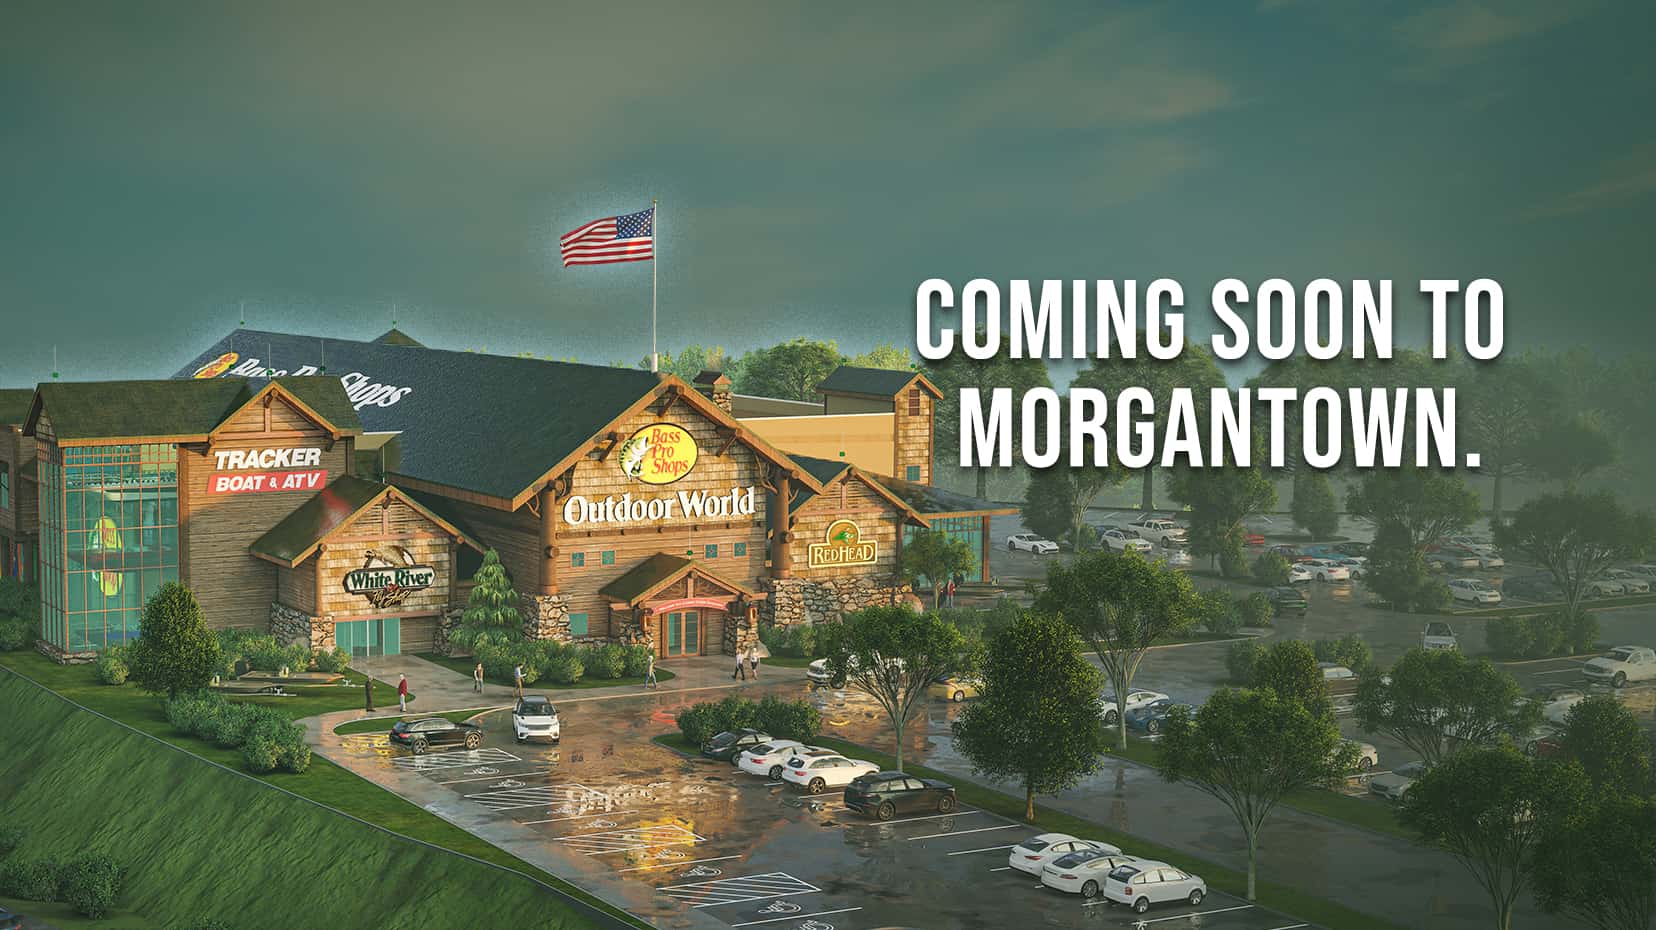 Bass Pro Shops in Morgantown opening later this year to hire 40 full-time  Outfitters - Bass Pro